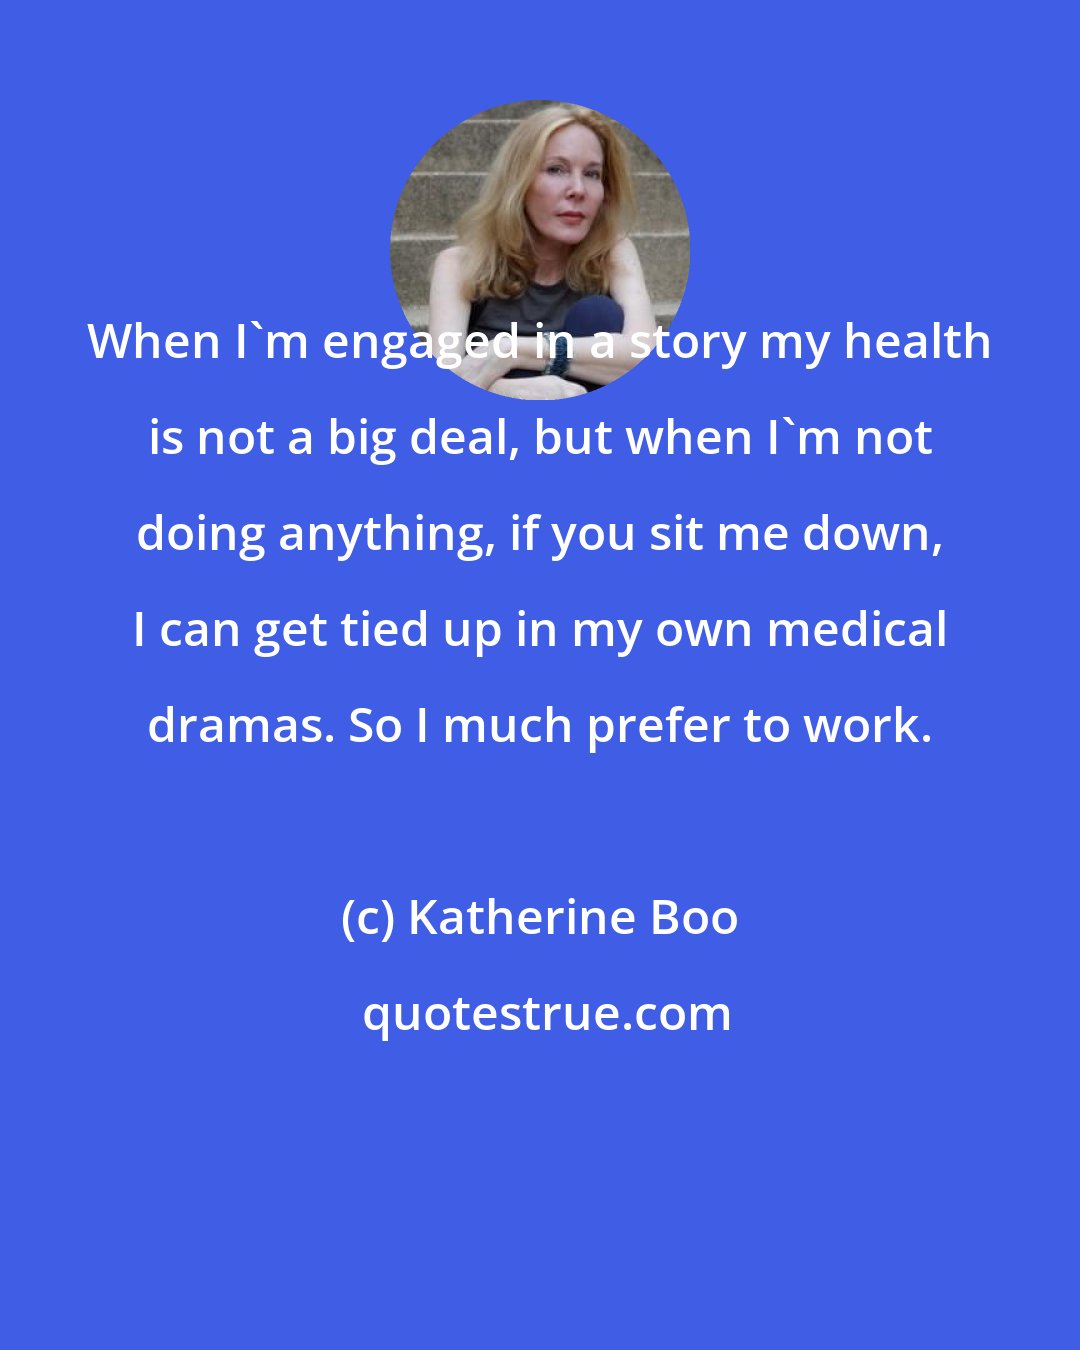 Katherine Boo: When I'm engaged in a story my health is not a big deal, but when I'm not doing anything, if you sit me down, I can get tied up in my own medical dramas. So I much prefer to work.